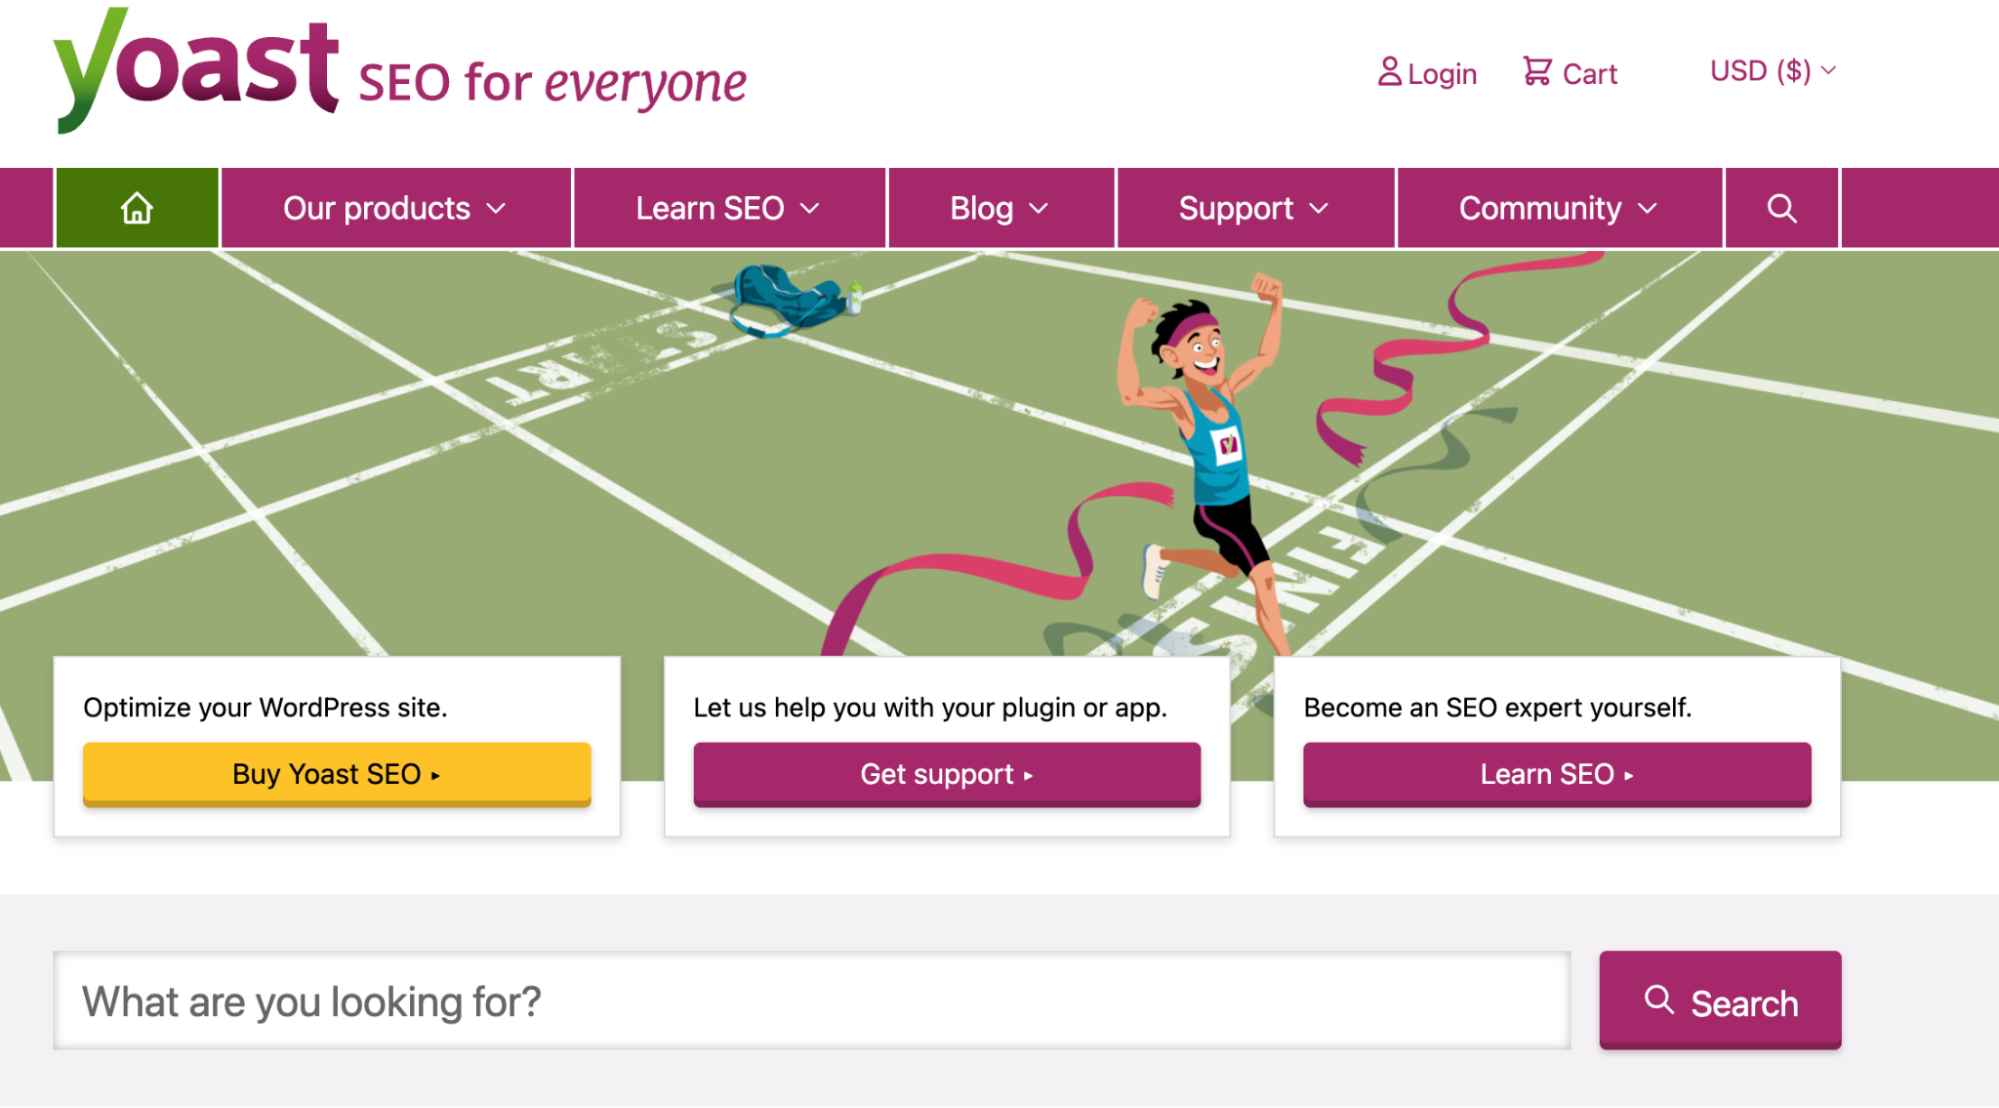 The homepage for Yoast